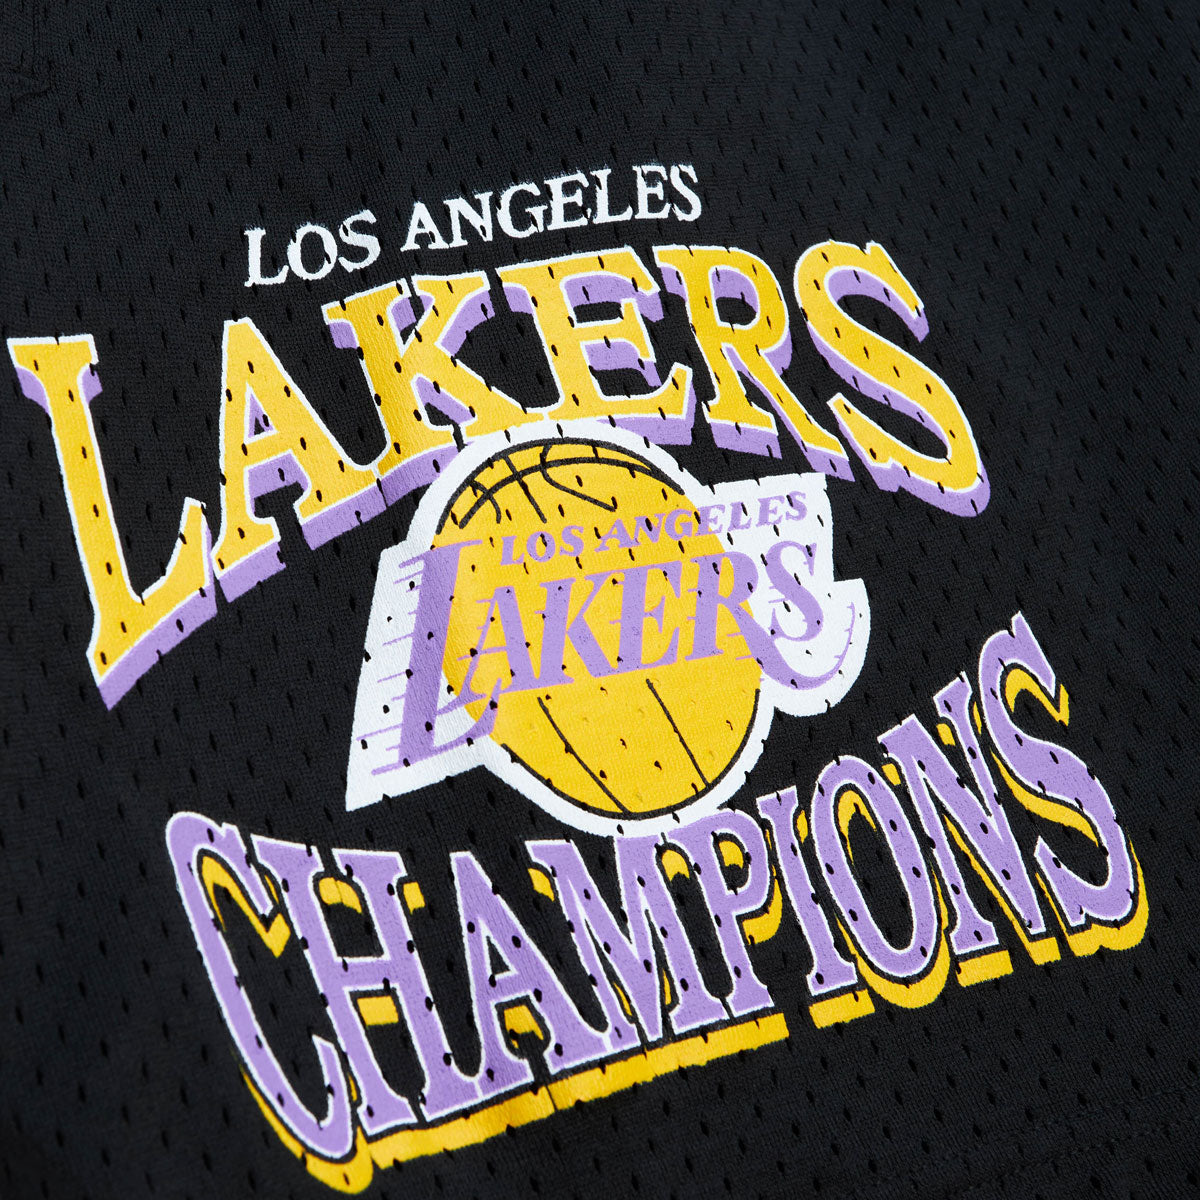 Mitchell & Ness Men's Los Angeles Lakers Champions T-Shirt in Black - Size Large